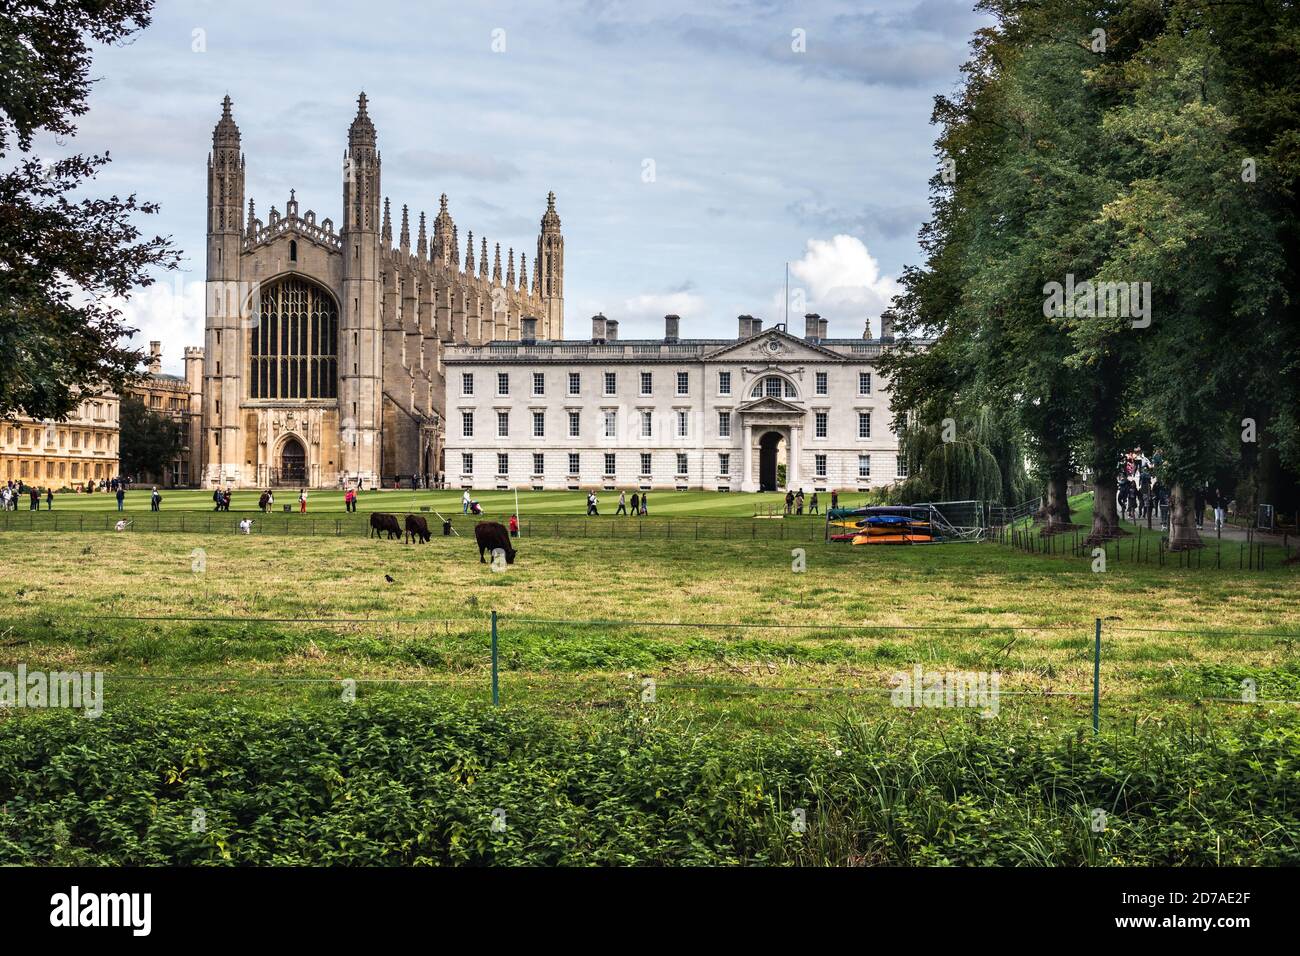 Kings College from the backs Cambridge showing cows in pasture in the foreground meadows Stock Photo